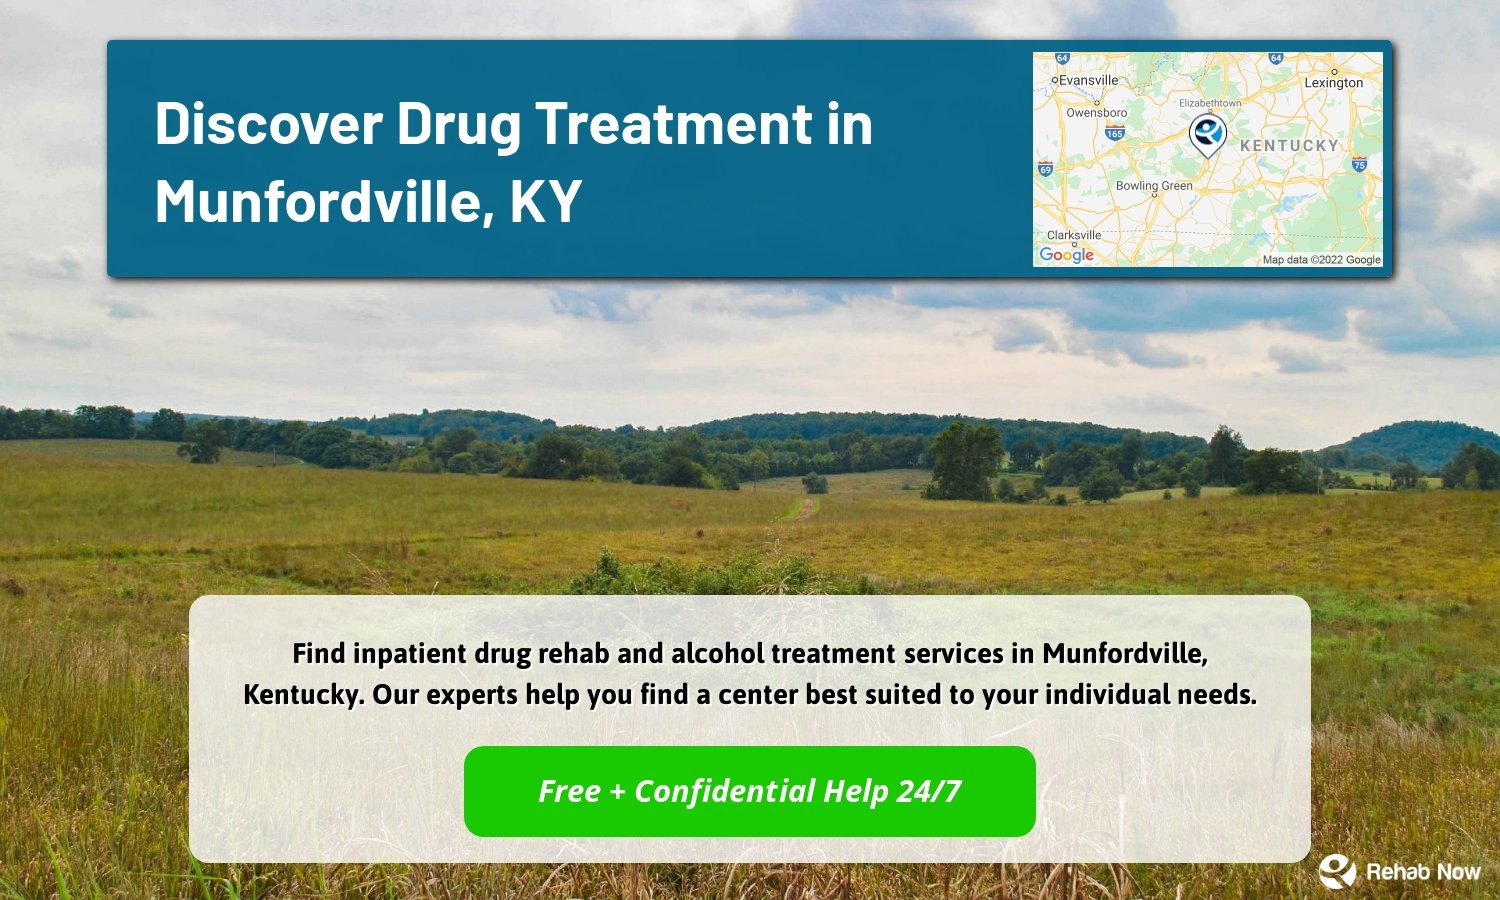 Find inpatient drug rehab and alcohol treatment services in Munfordville, Kentucky. Our experts help you find a center best suited to your individual needs.